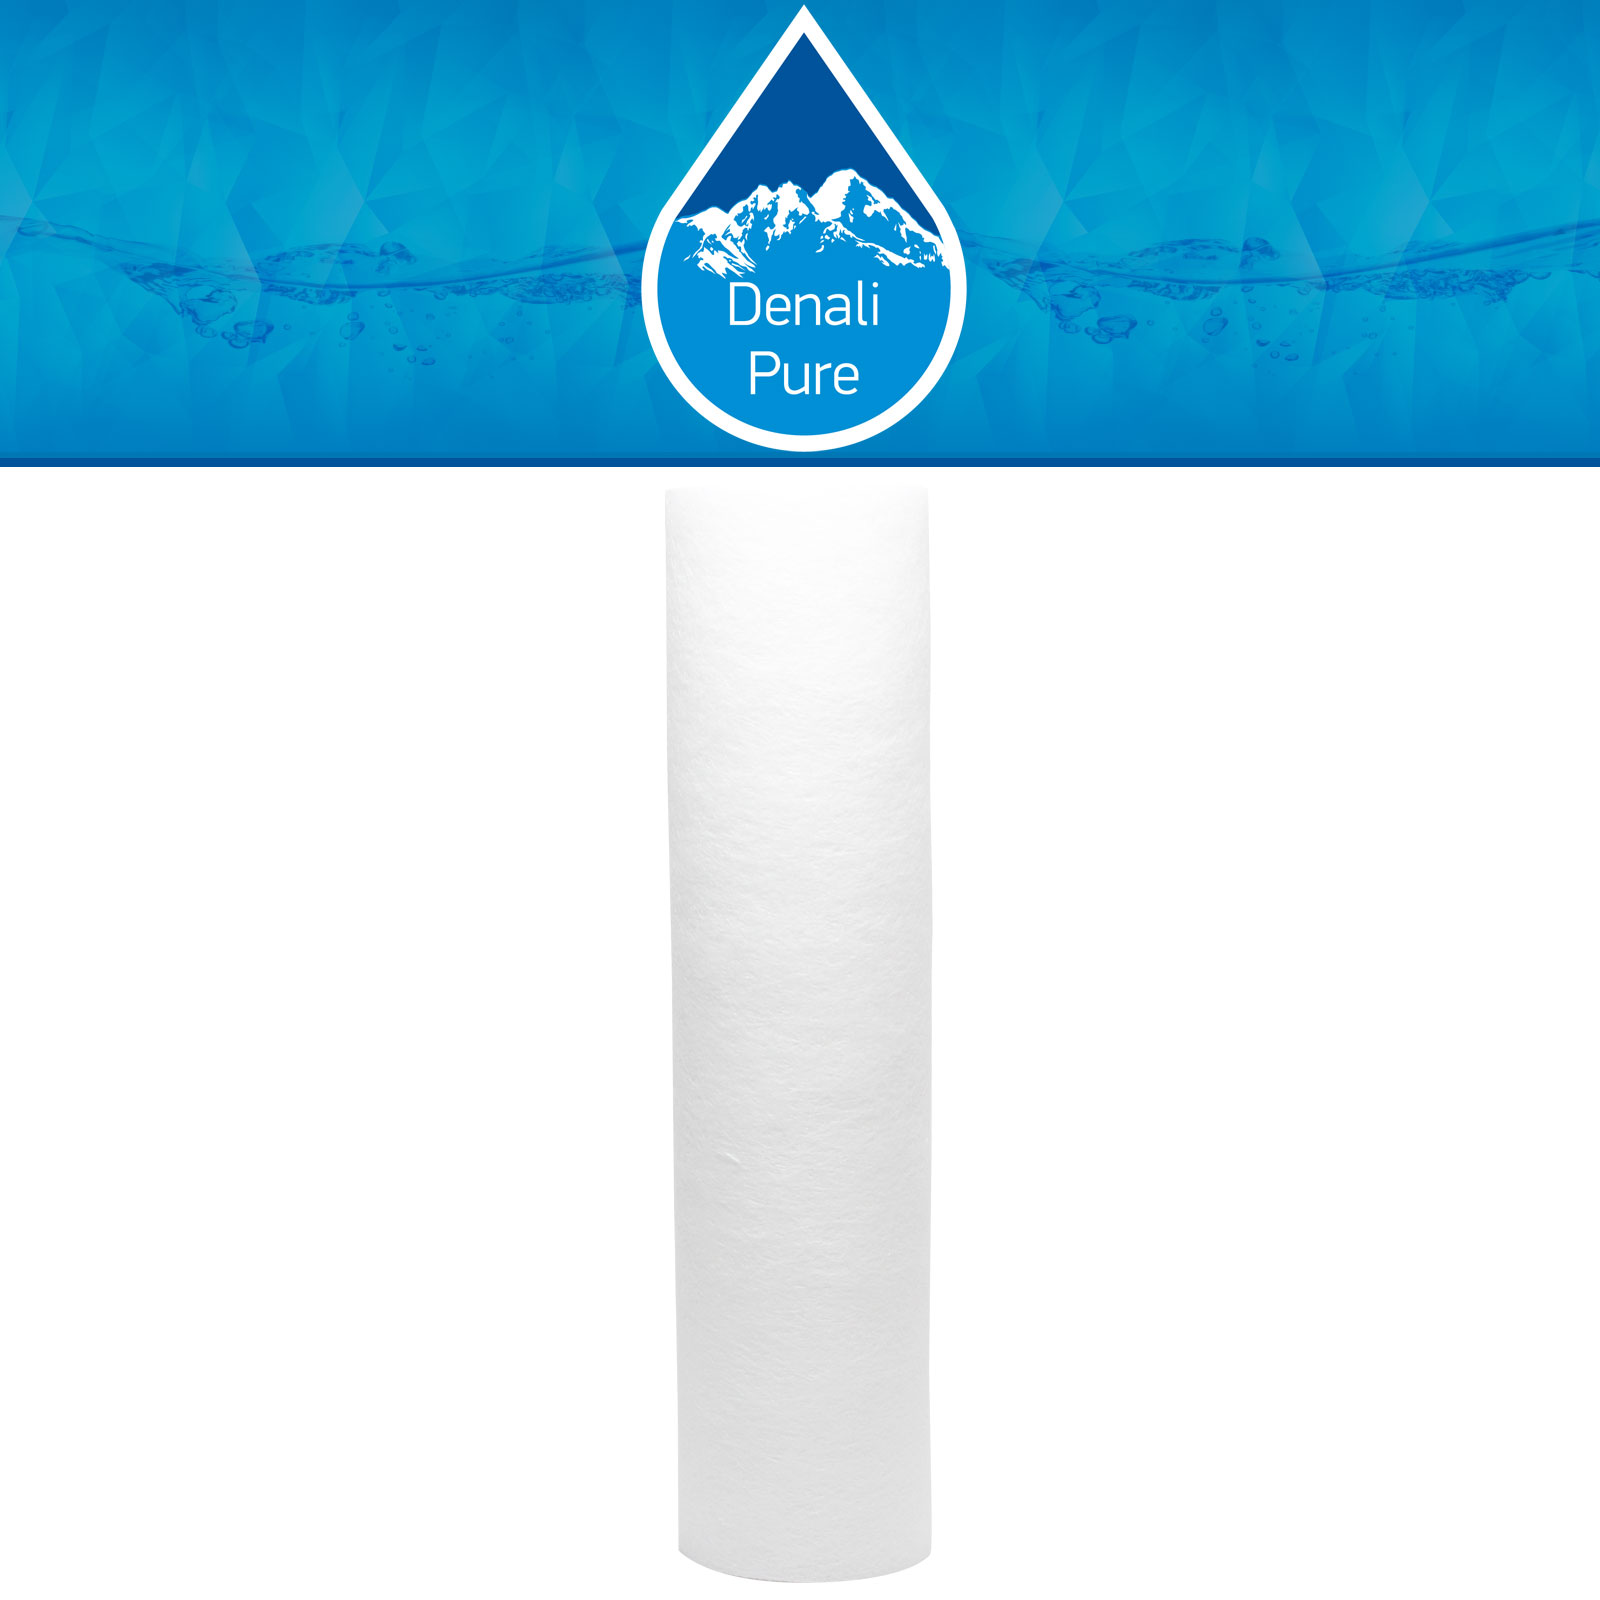 2-Pack Compatible with GE GXWH20F Polypropylene Sediment Filter - Universal 10-inch 5-Micron Cartridge for GE HOUSEHOLD WATER FILTRATION SYSTEM - Denali Pure Brand - image 2 of 4